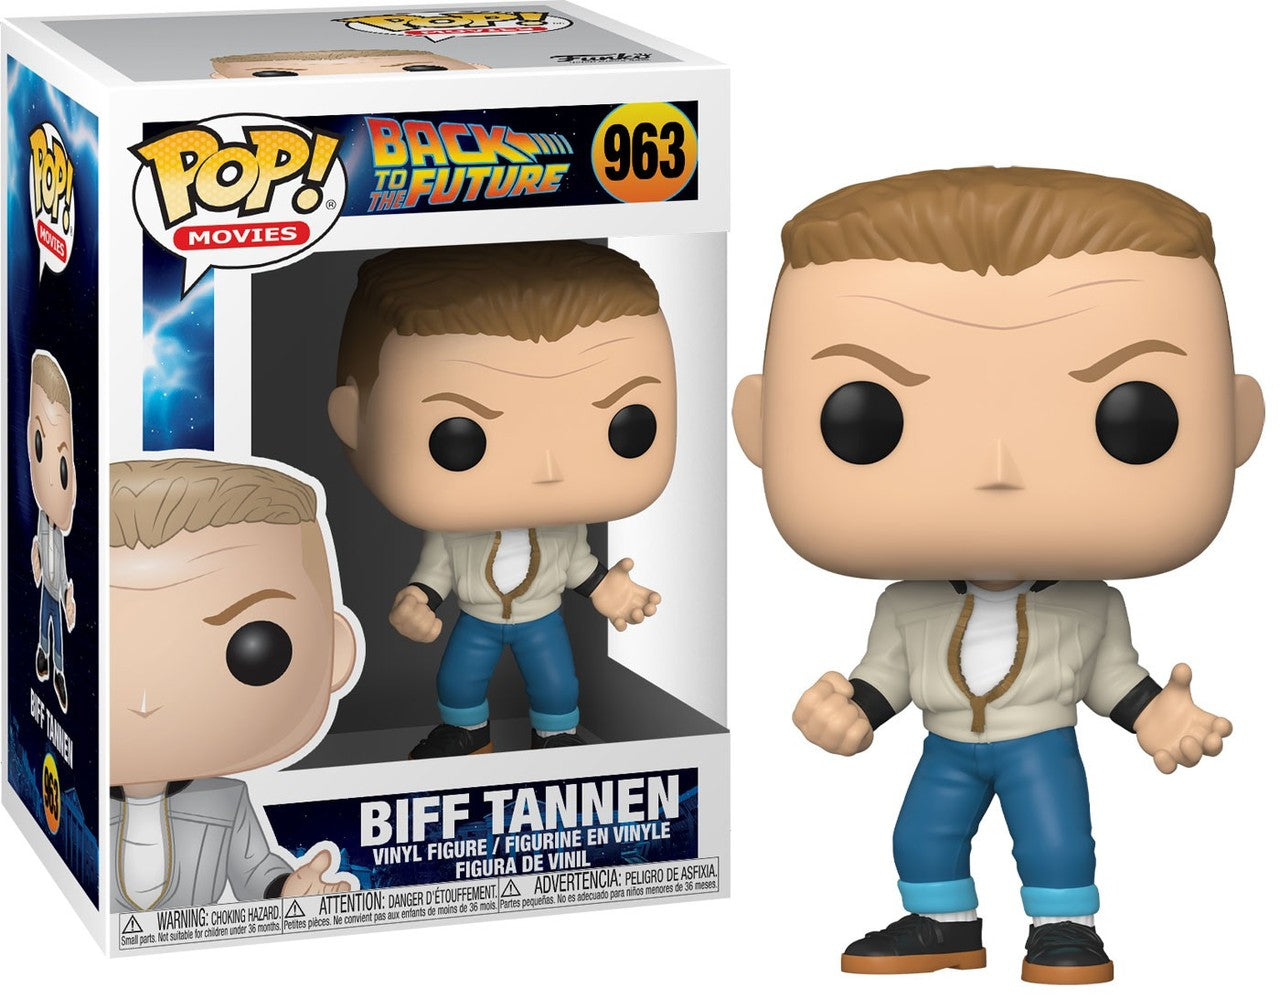 BACK TO THE FUTURE POP N° 963 Biff Tannen